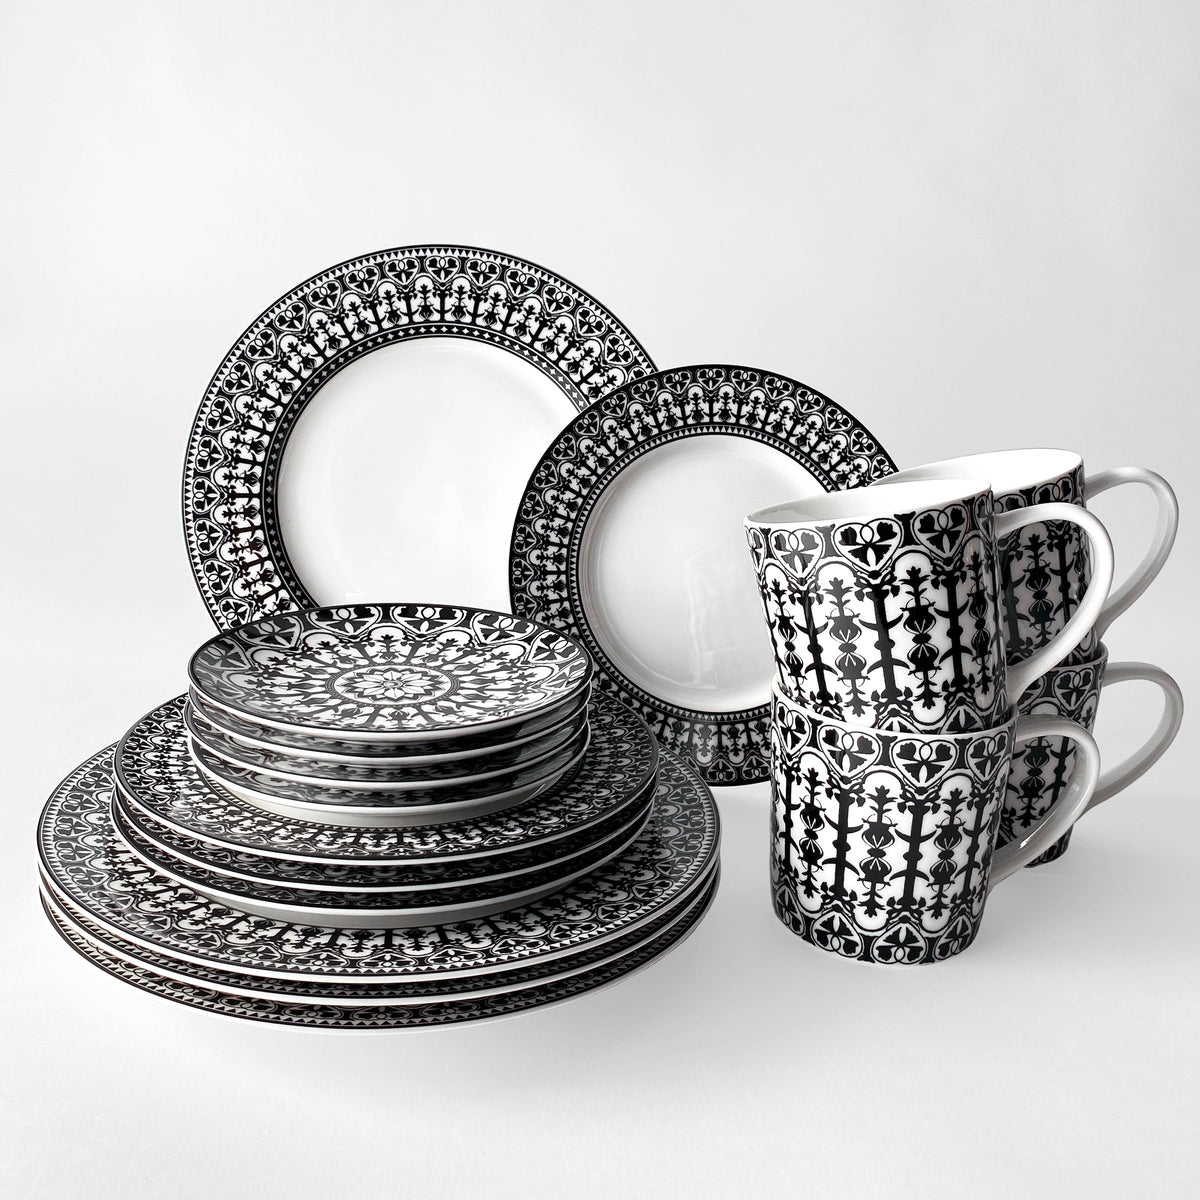 Description: The Casablanca Canapé Plates from the Caskata Artisanal Home Geometrics Collection, showcasing a stunning combination of black and white, elegantly displayed on a pristine white surface.